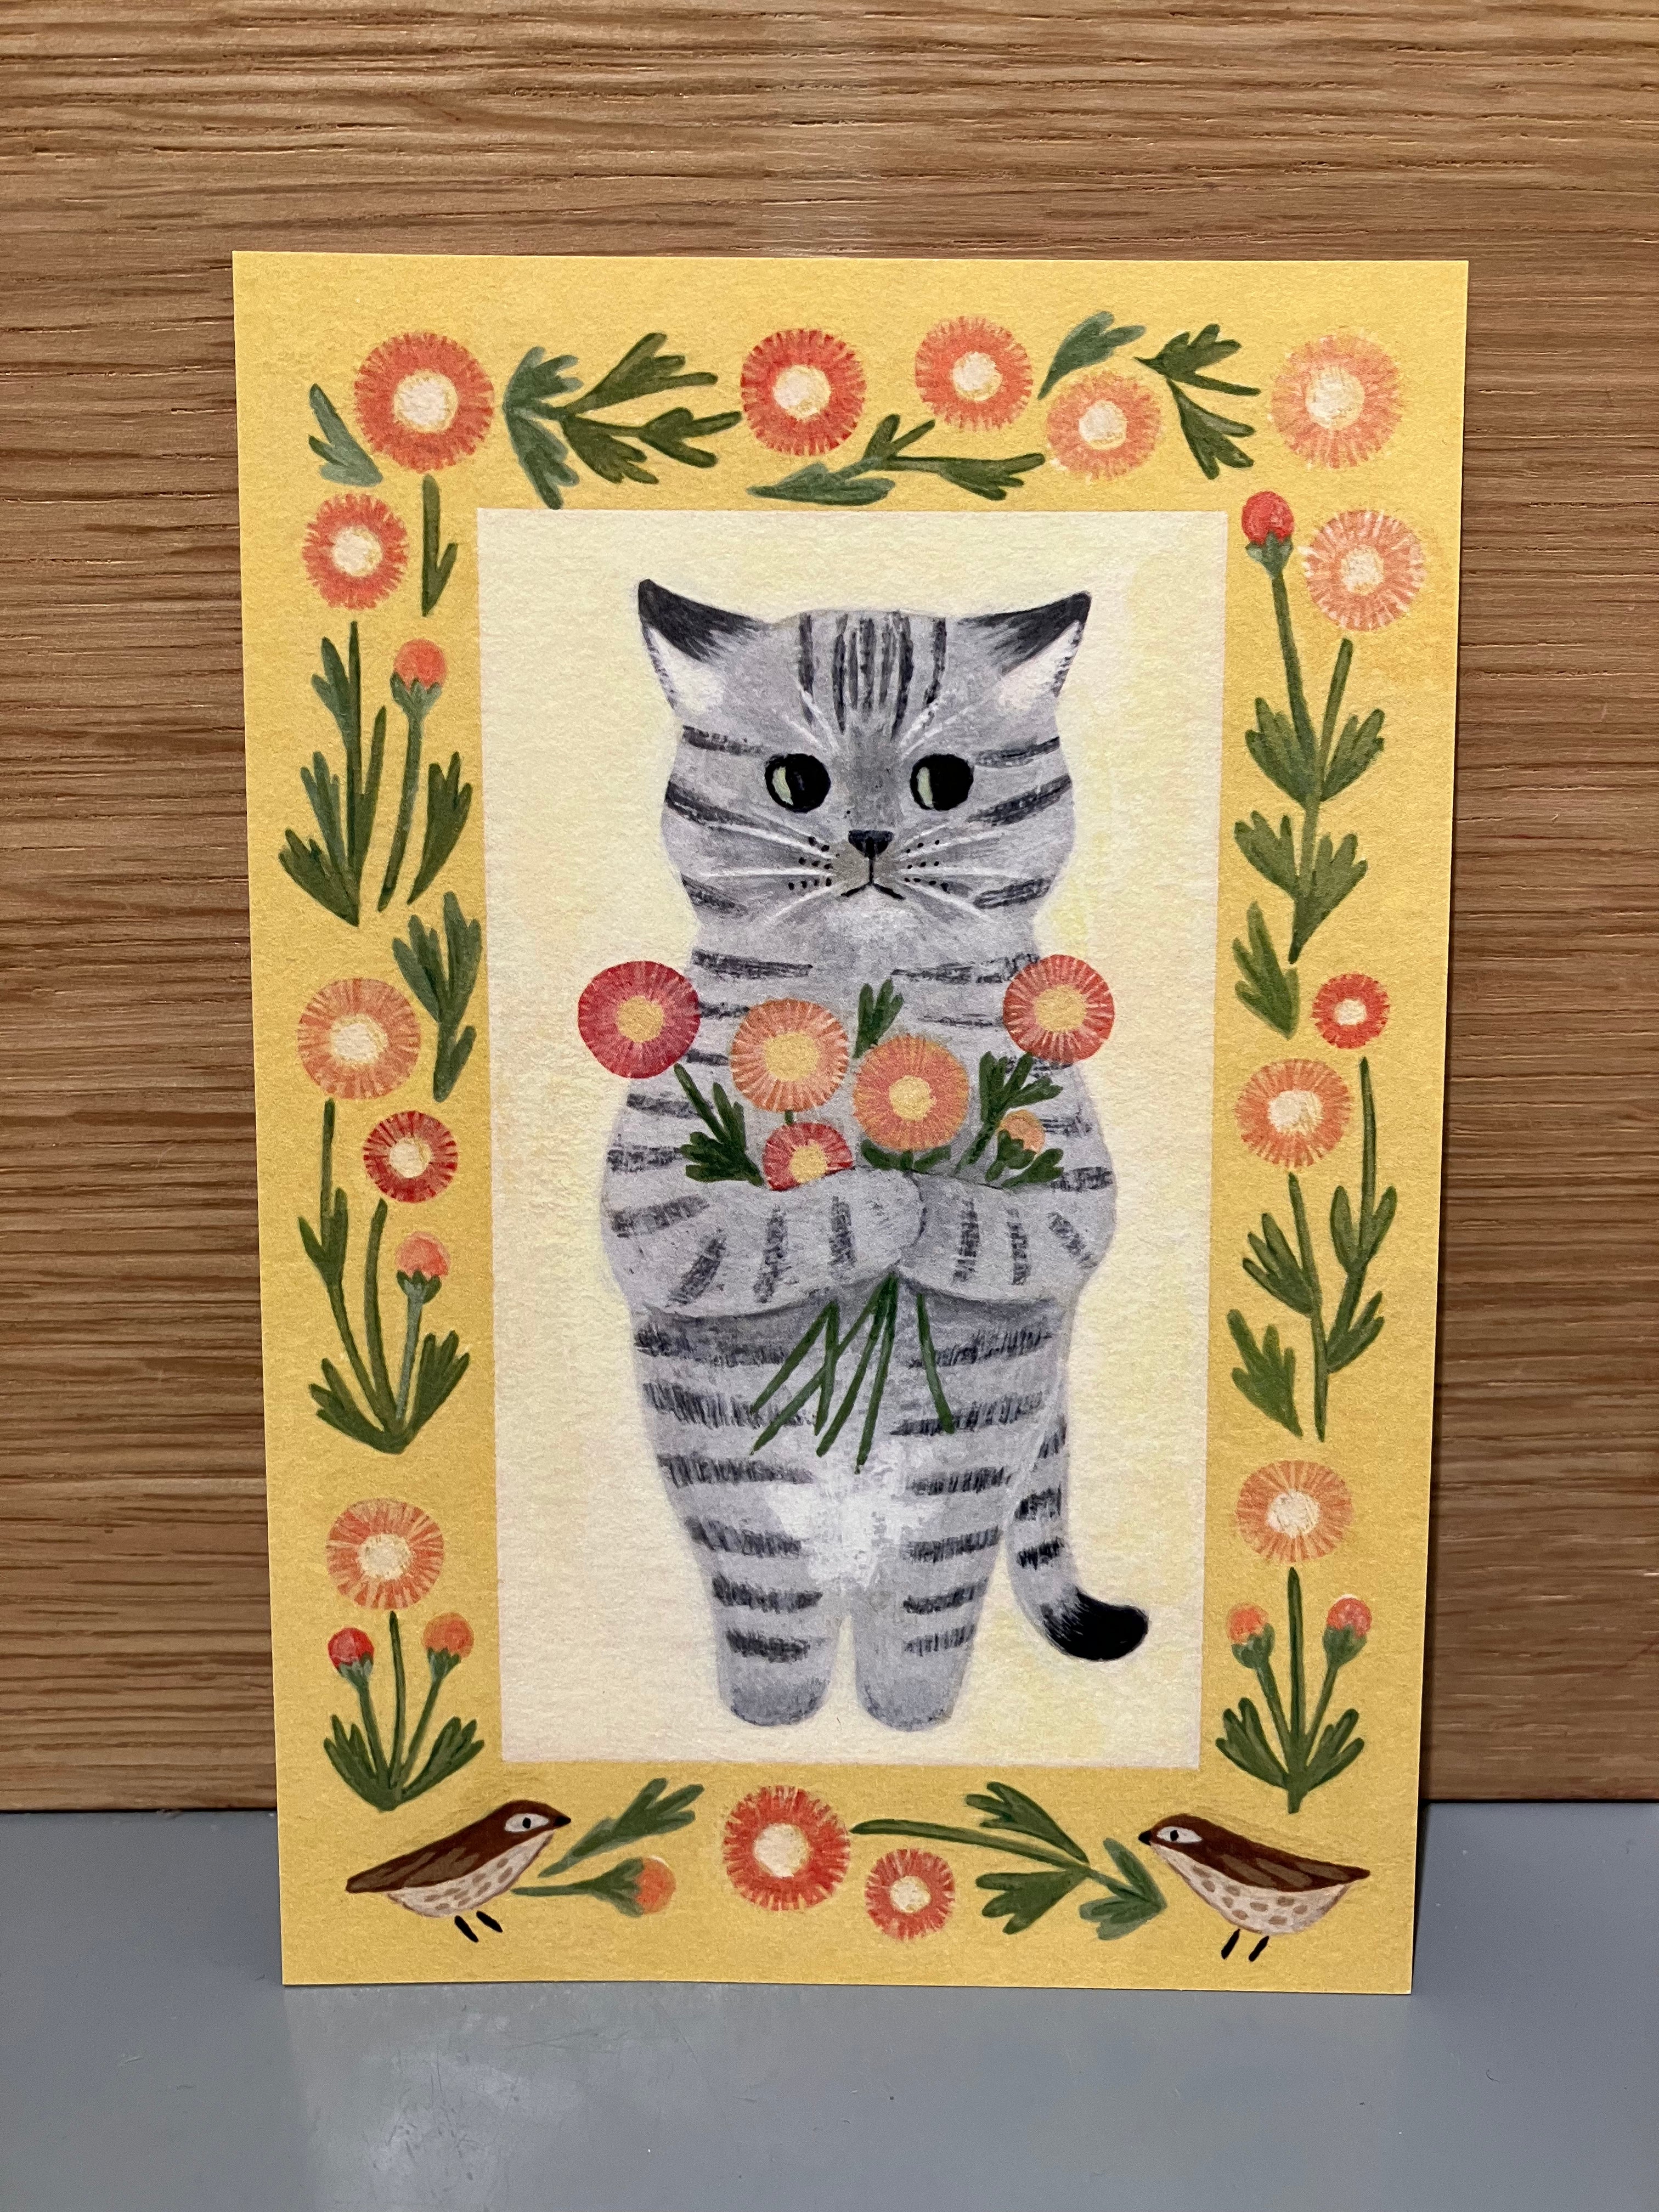 Japanese card yellow background, with gray striped cat holding flowers